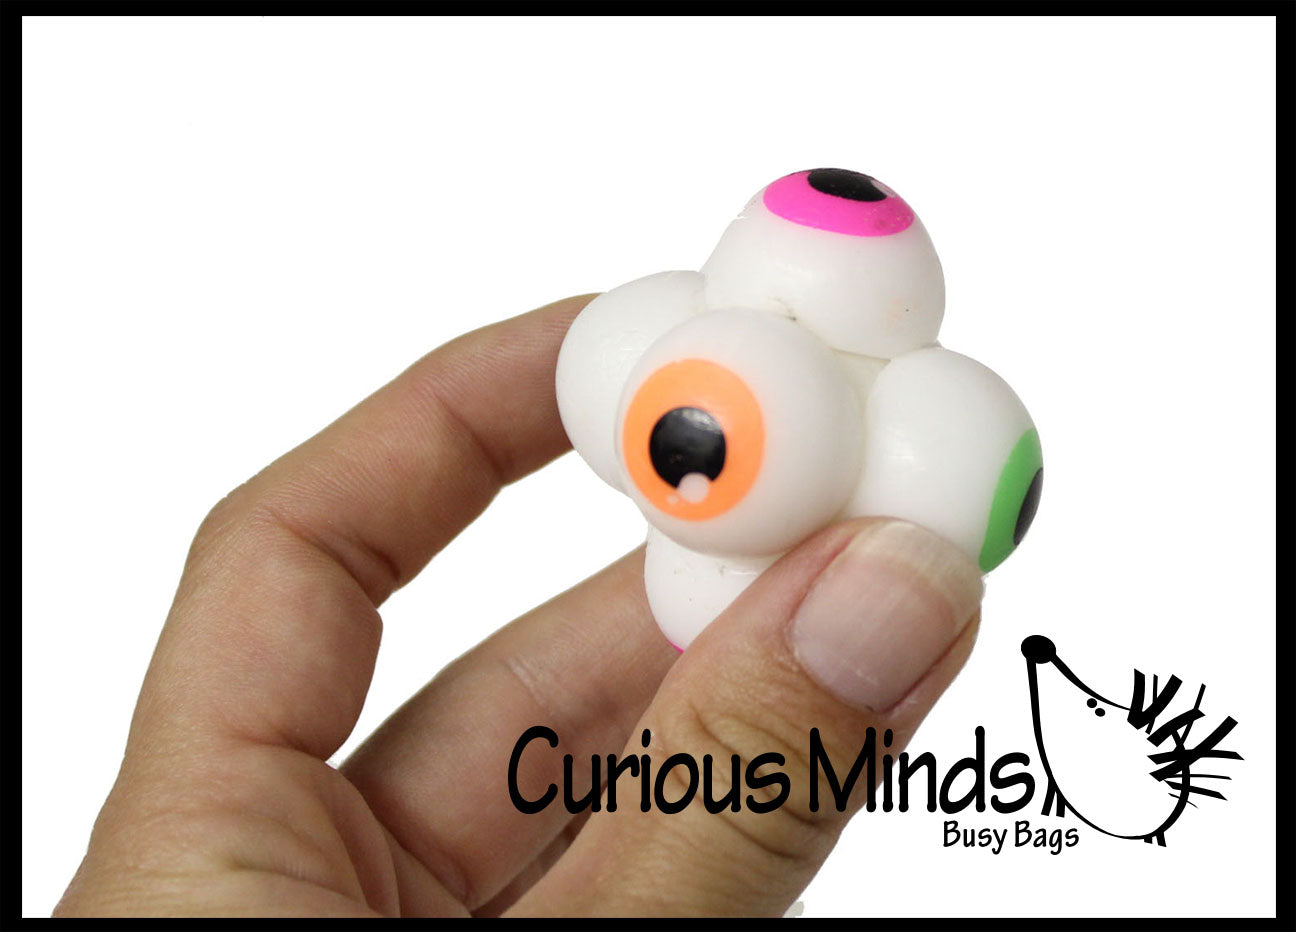 CLEARANCE SALE - Eyeball Bouncy Balls - Toys for Ophthalmologists Optometrists Doctors Bulk Small Novelty Toy Prize Assortment Halloween Party Gifts